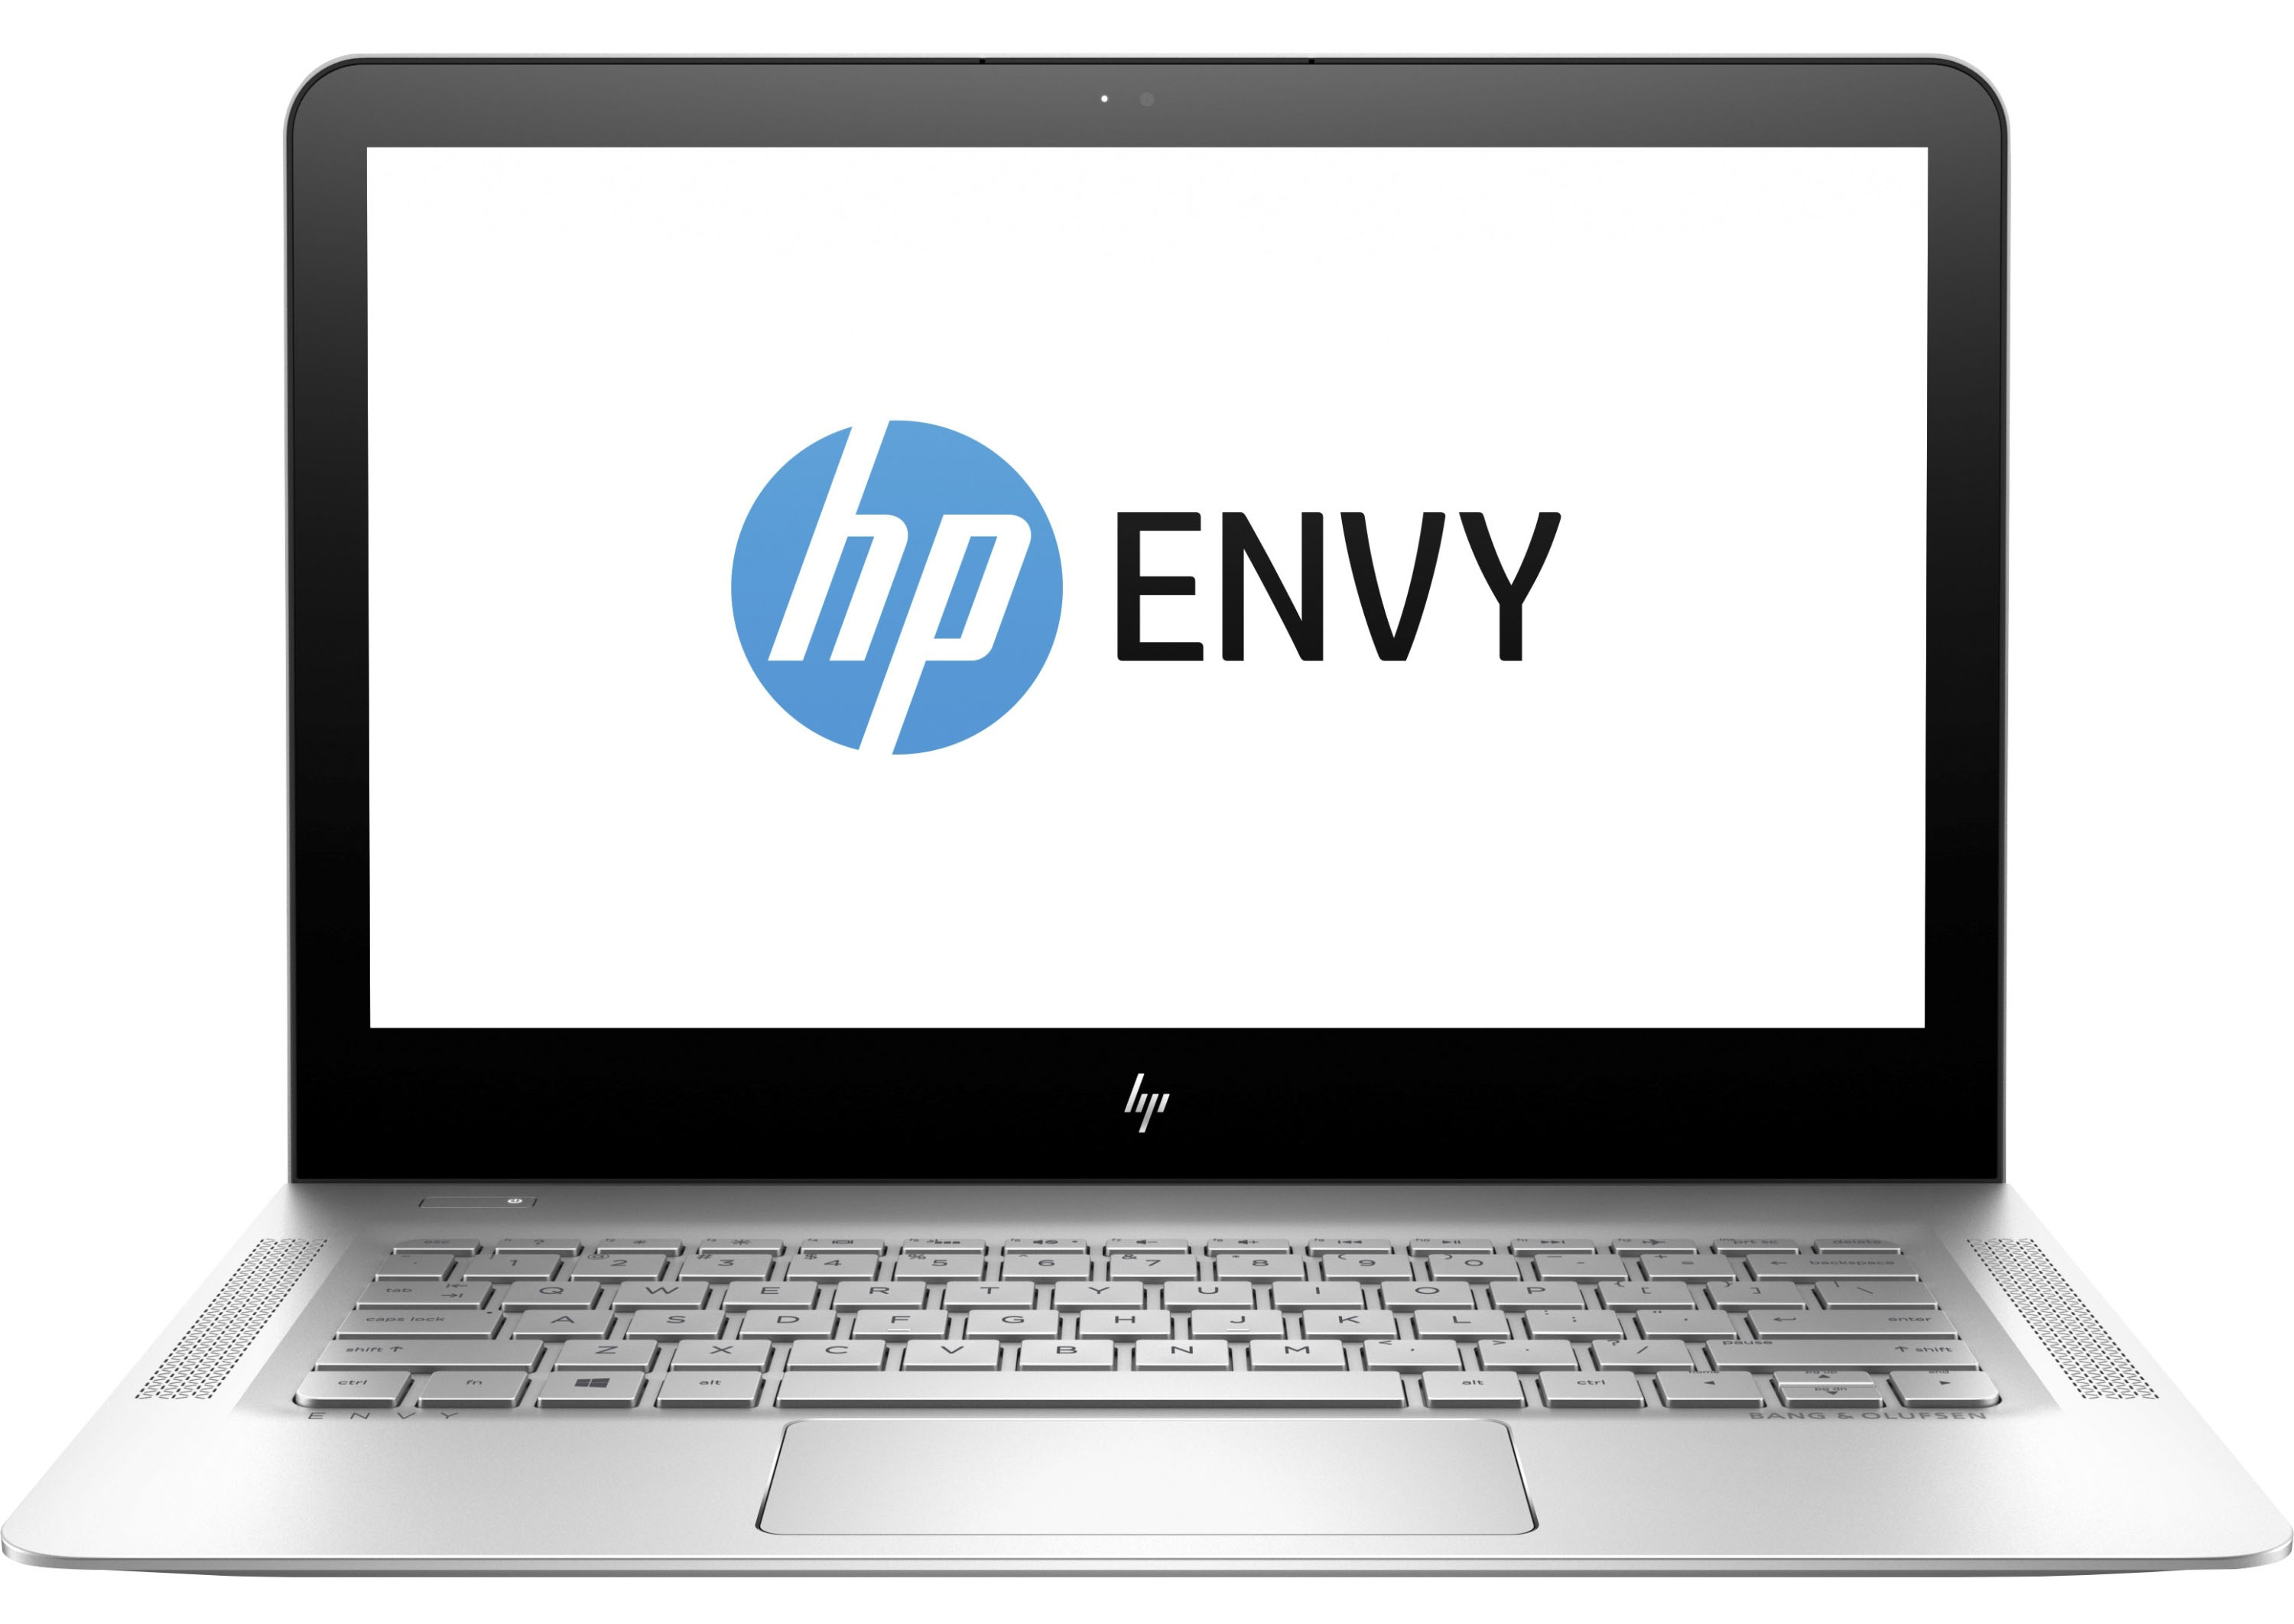 HP Envy 13 review the mainstream Envy receives a high-end Spectre  treatment